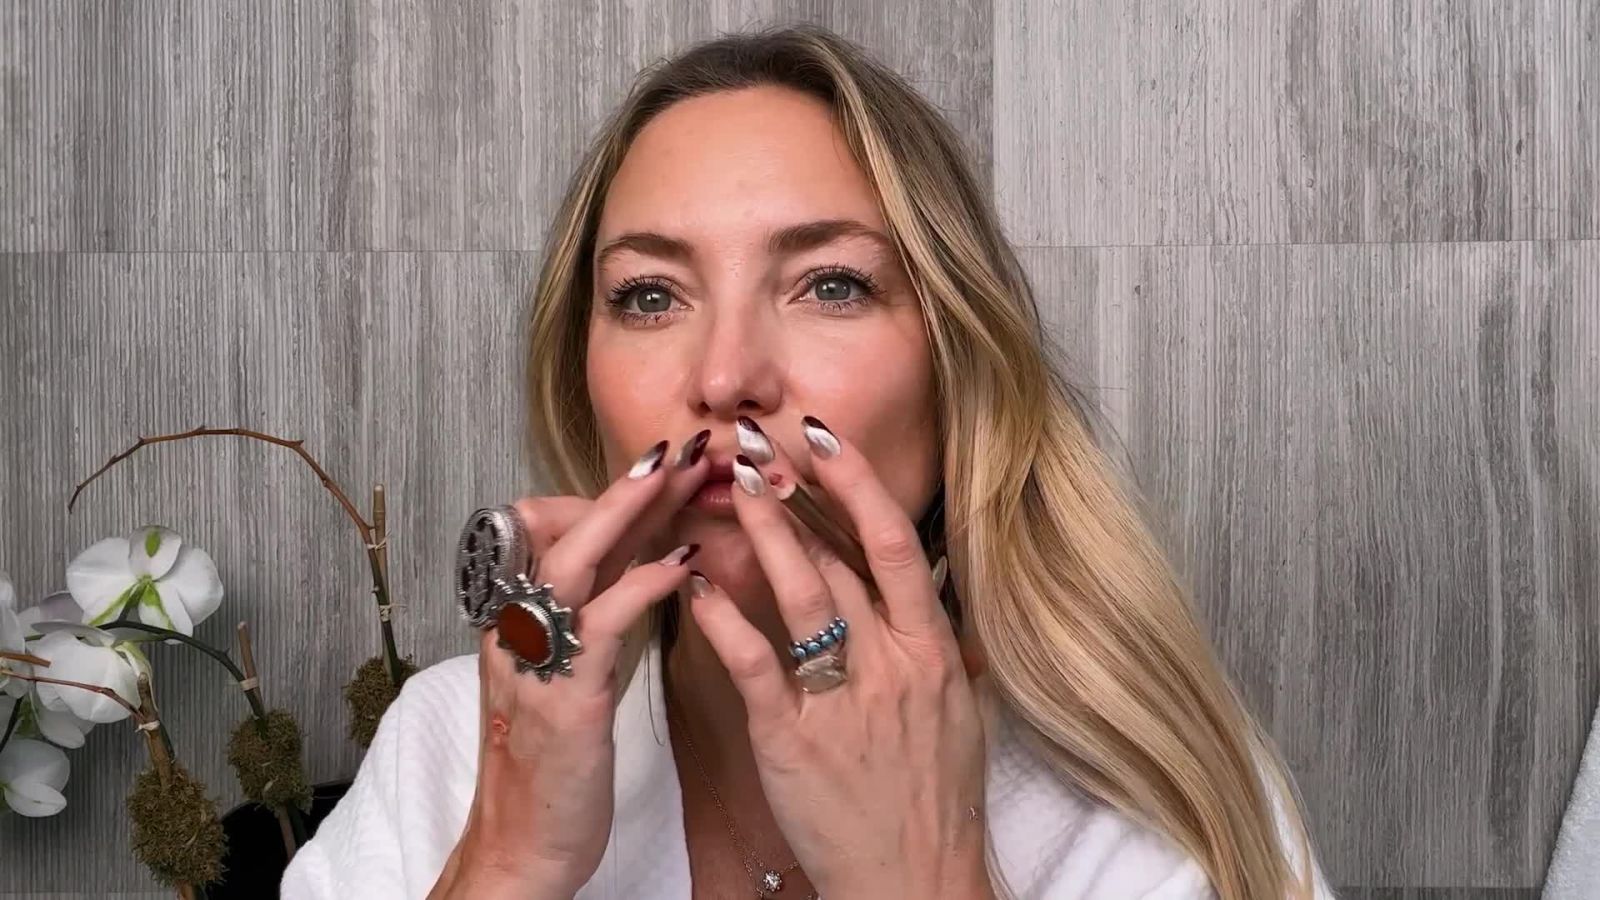 Kate Hudson’s Guide to Inside-Out Wellness and “Wakeup” Makeup